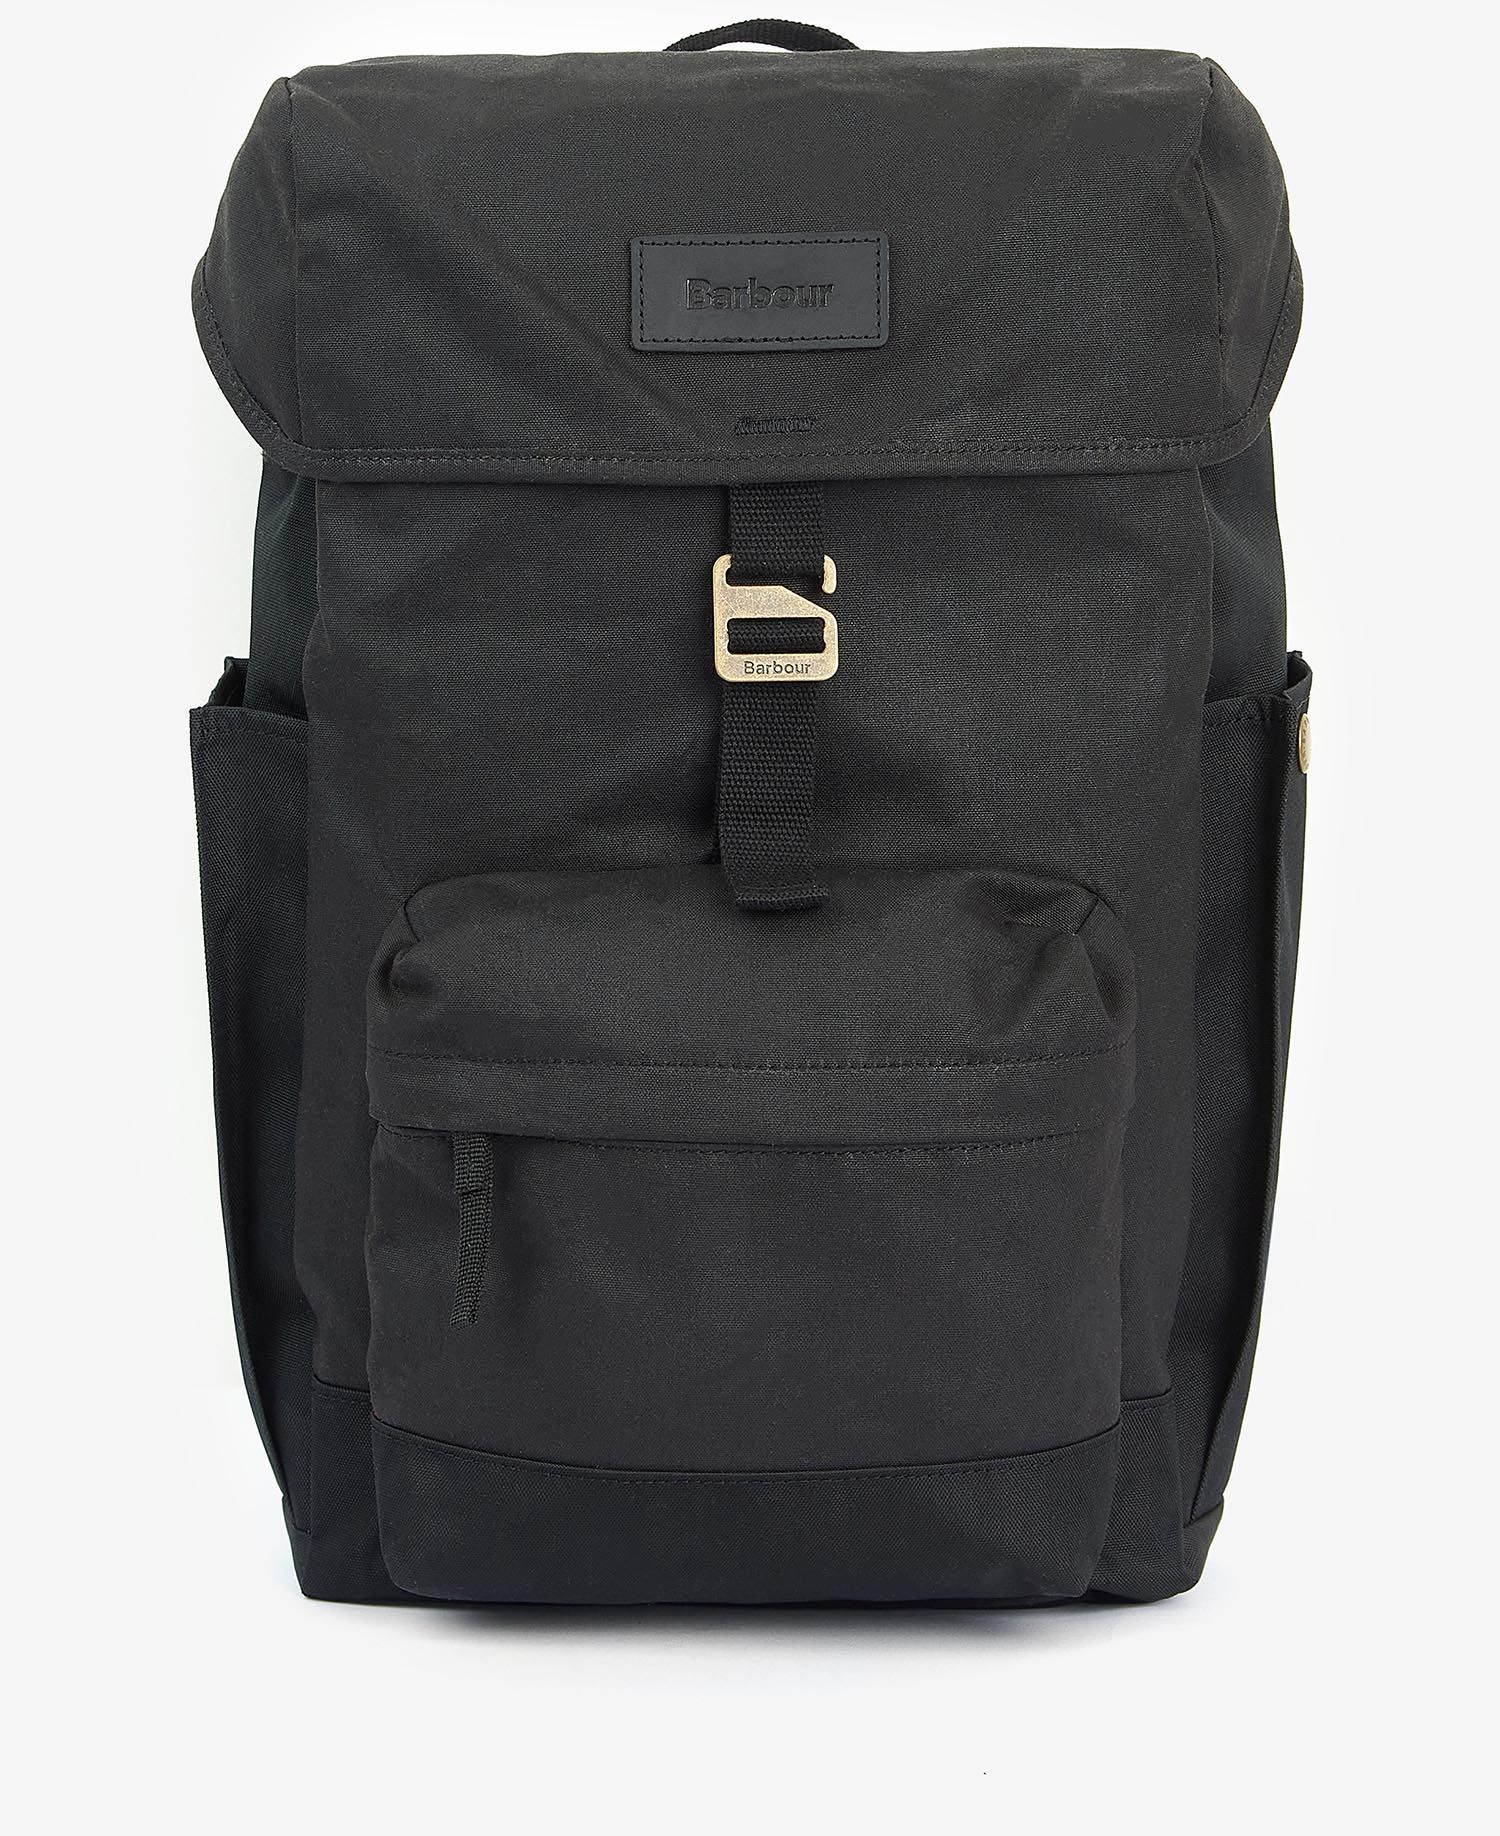 Shop the Barbour Essential Wax Backpack in Black today. | Barbour